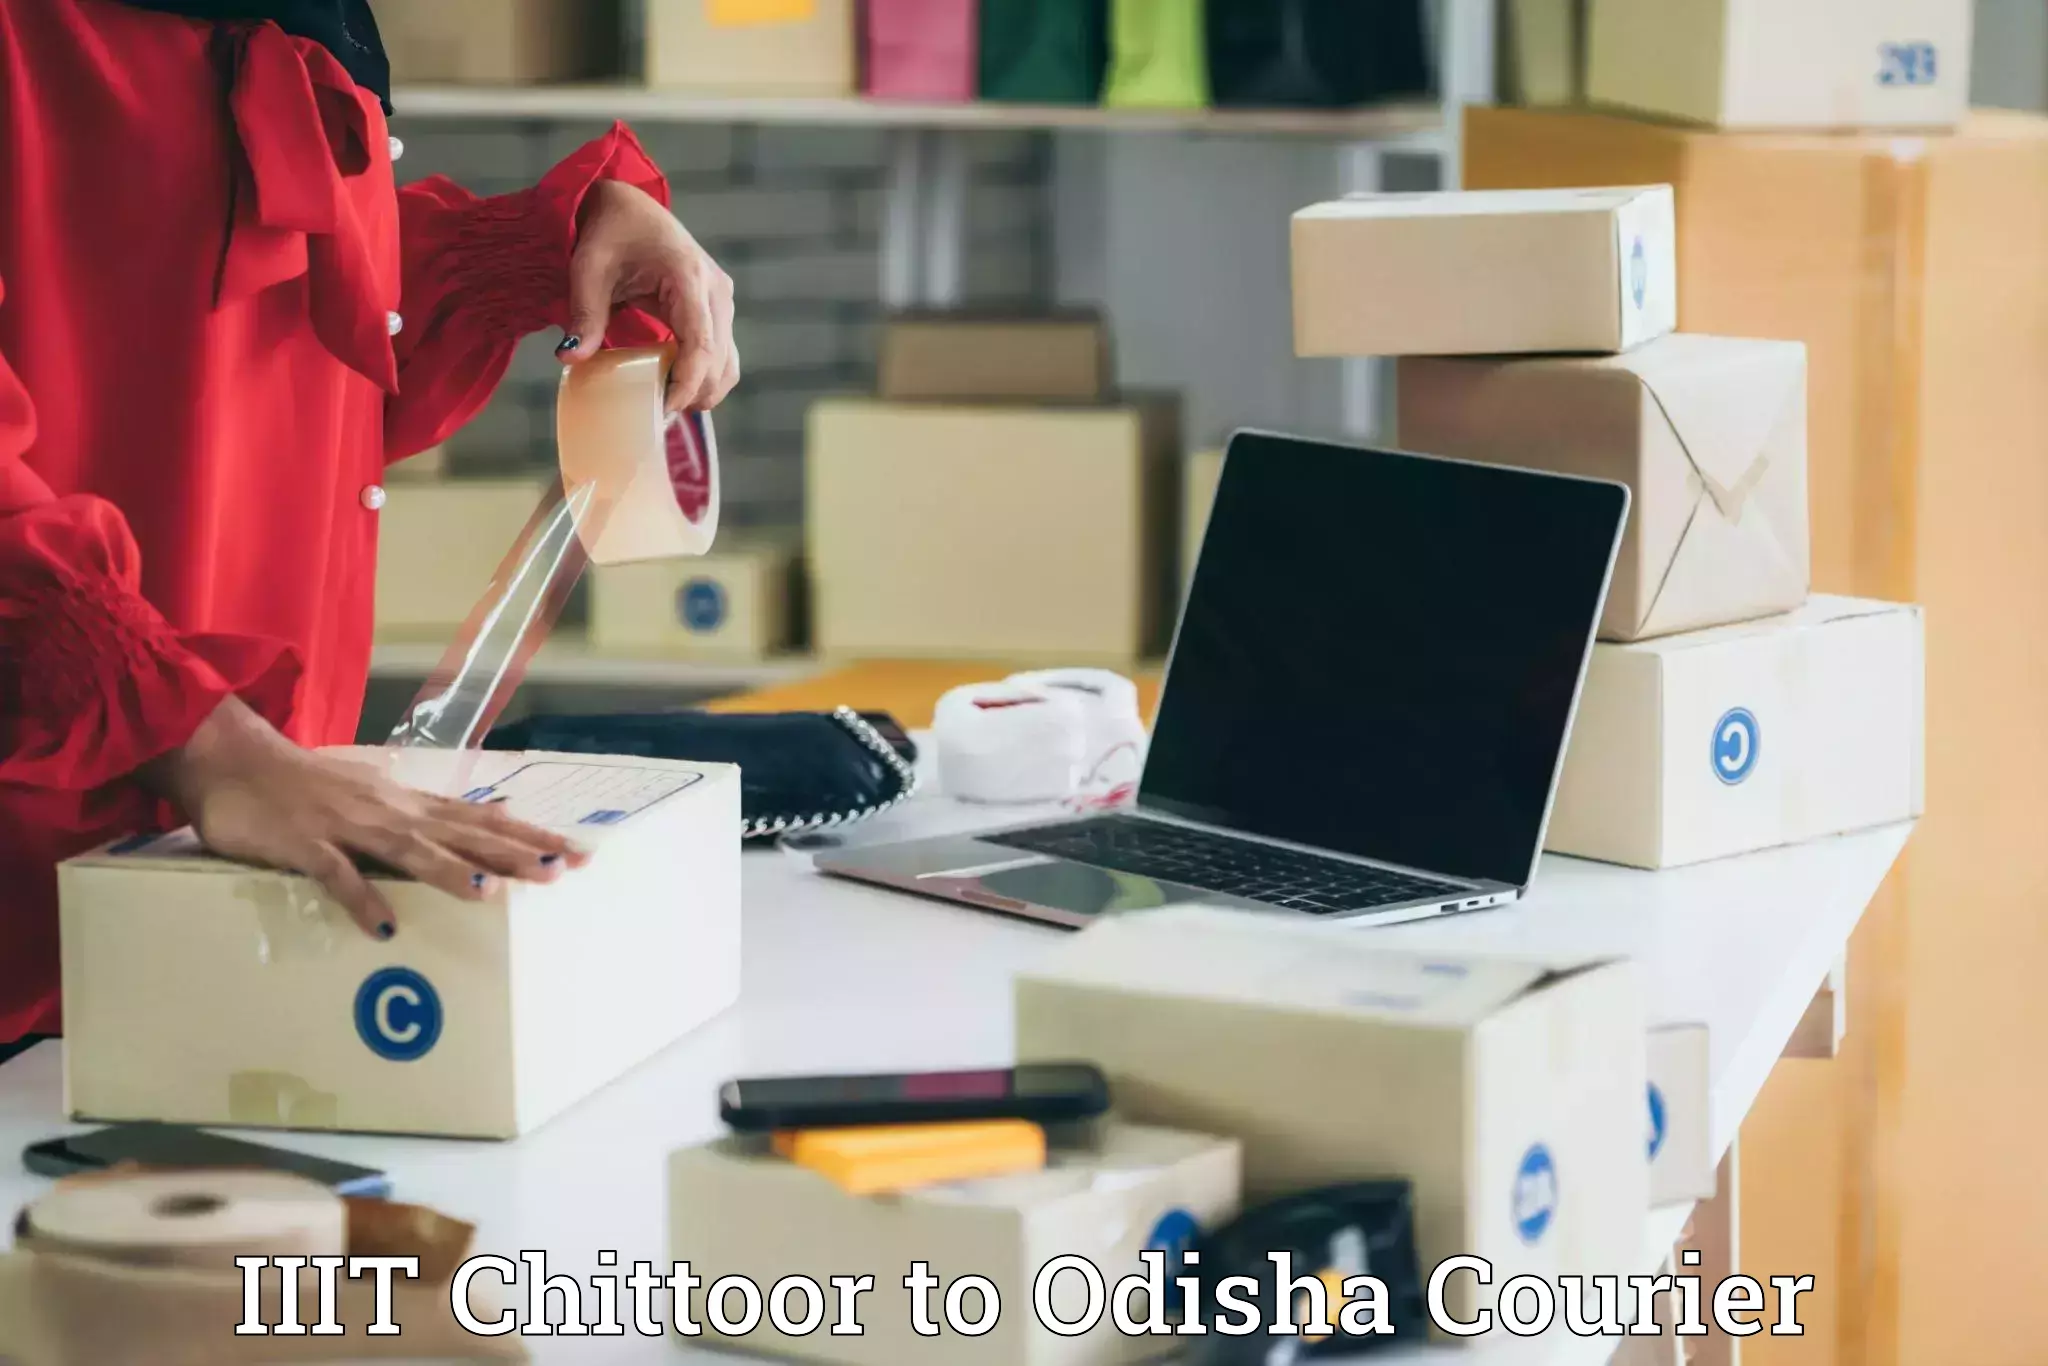 Courier service innovation in IIIT Chittoor to Baisinga